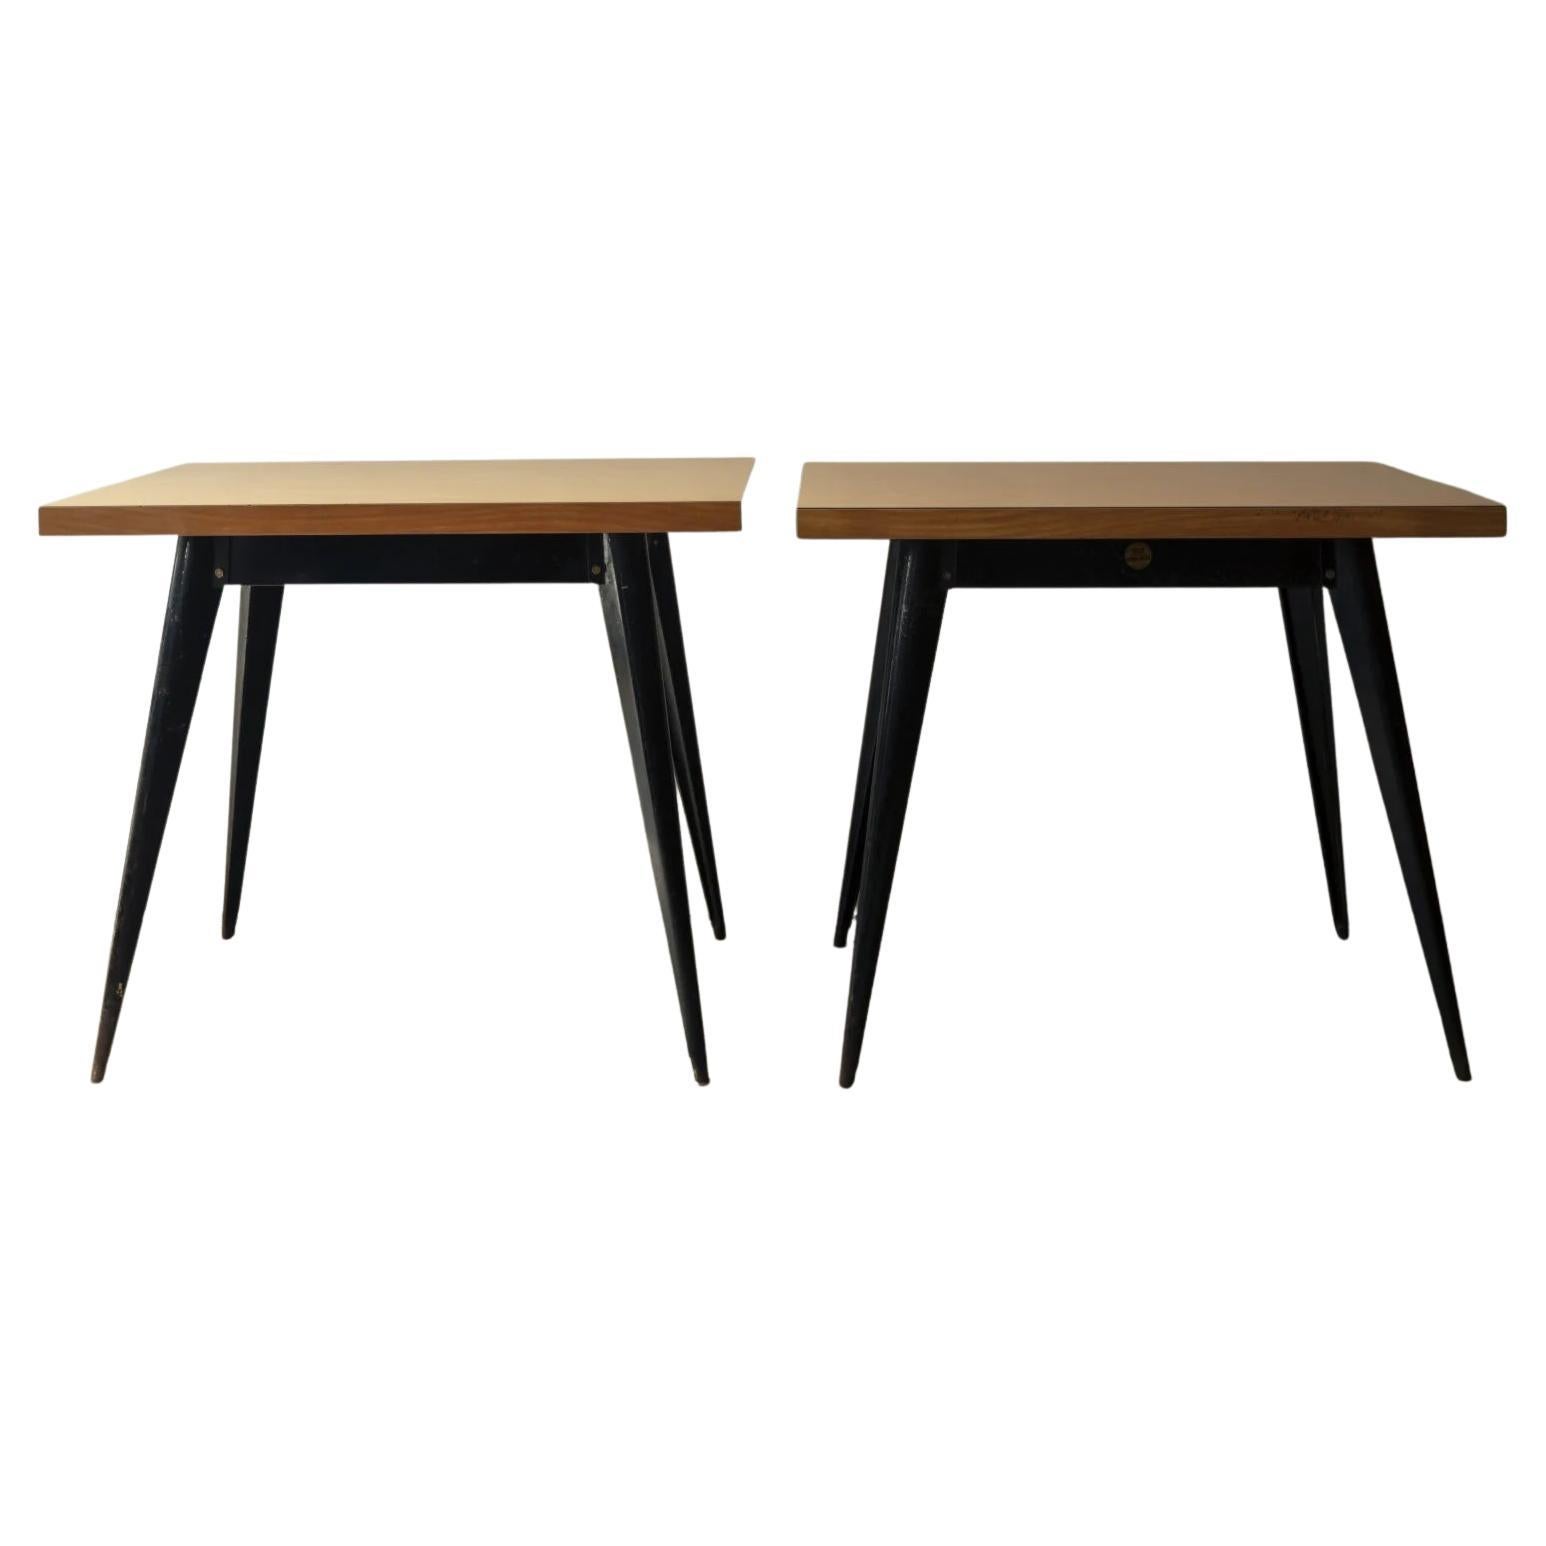 Pair of Tolix ‘55’ Tables